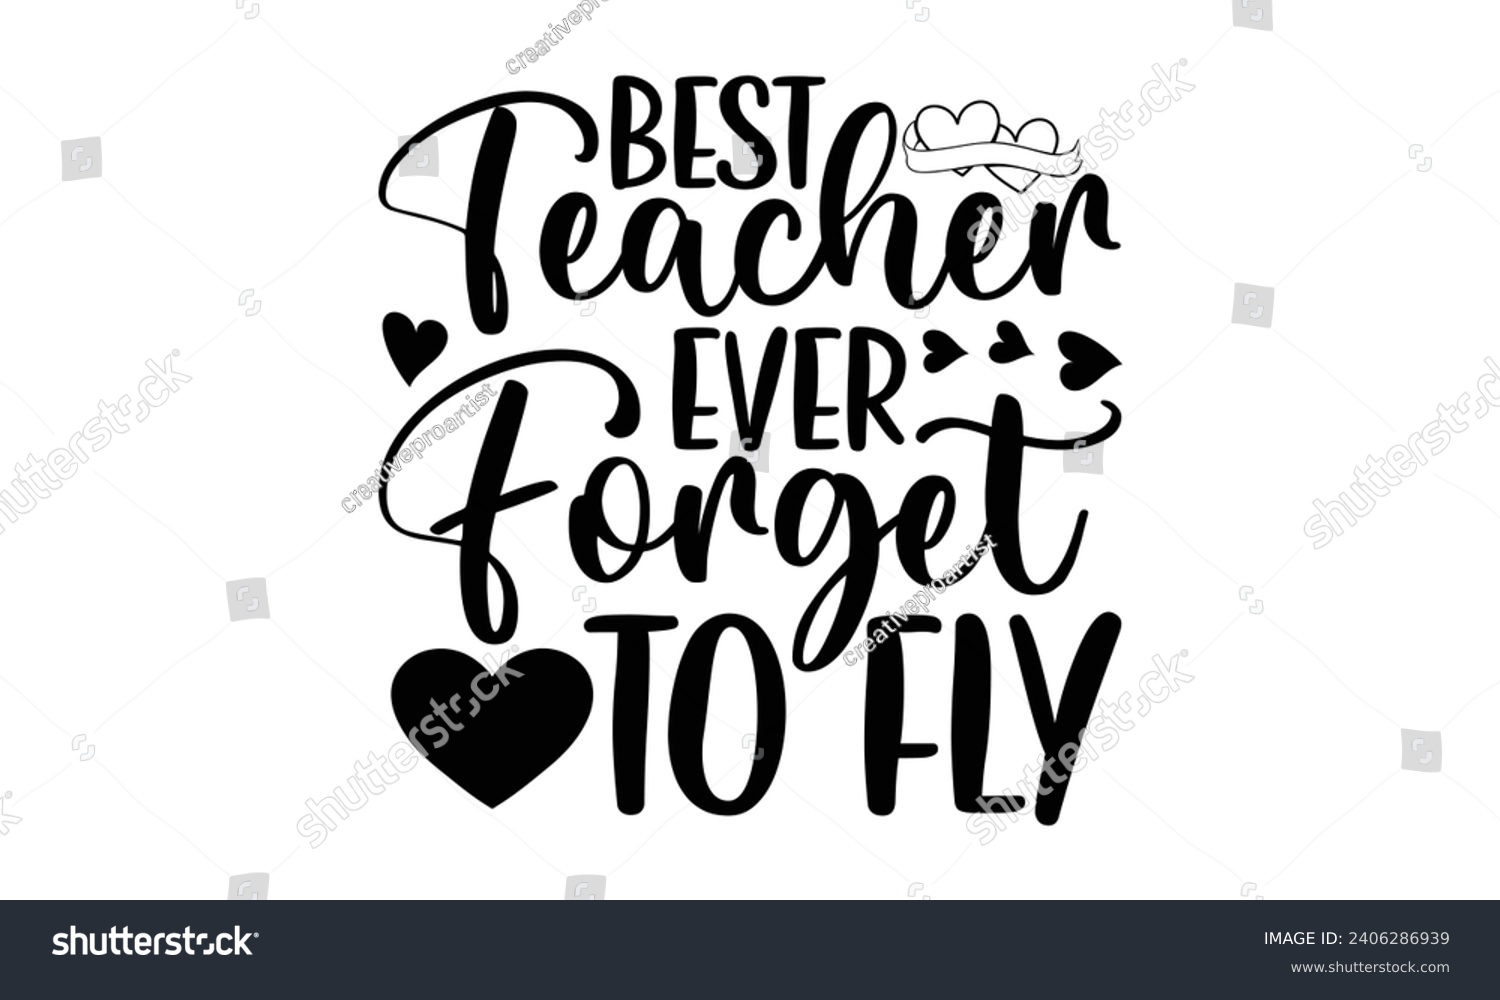 SVG of Best Teacher Ever Forget To Fly- Best friends t- shirt design, Hand drawn vintage illustration with hand-lettering and decoration elements, greeting card template with typography text svg